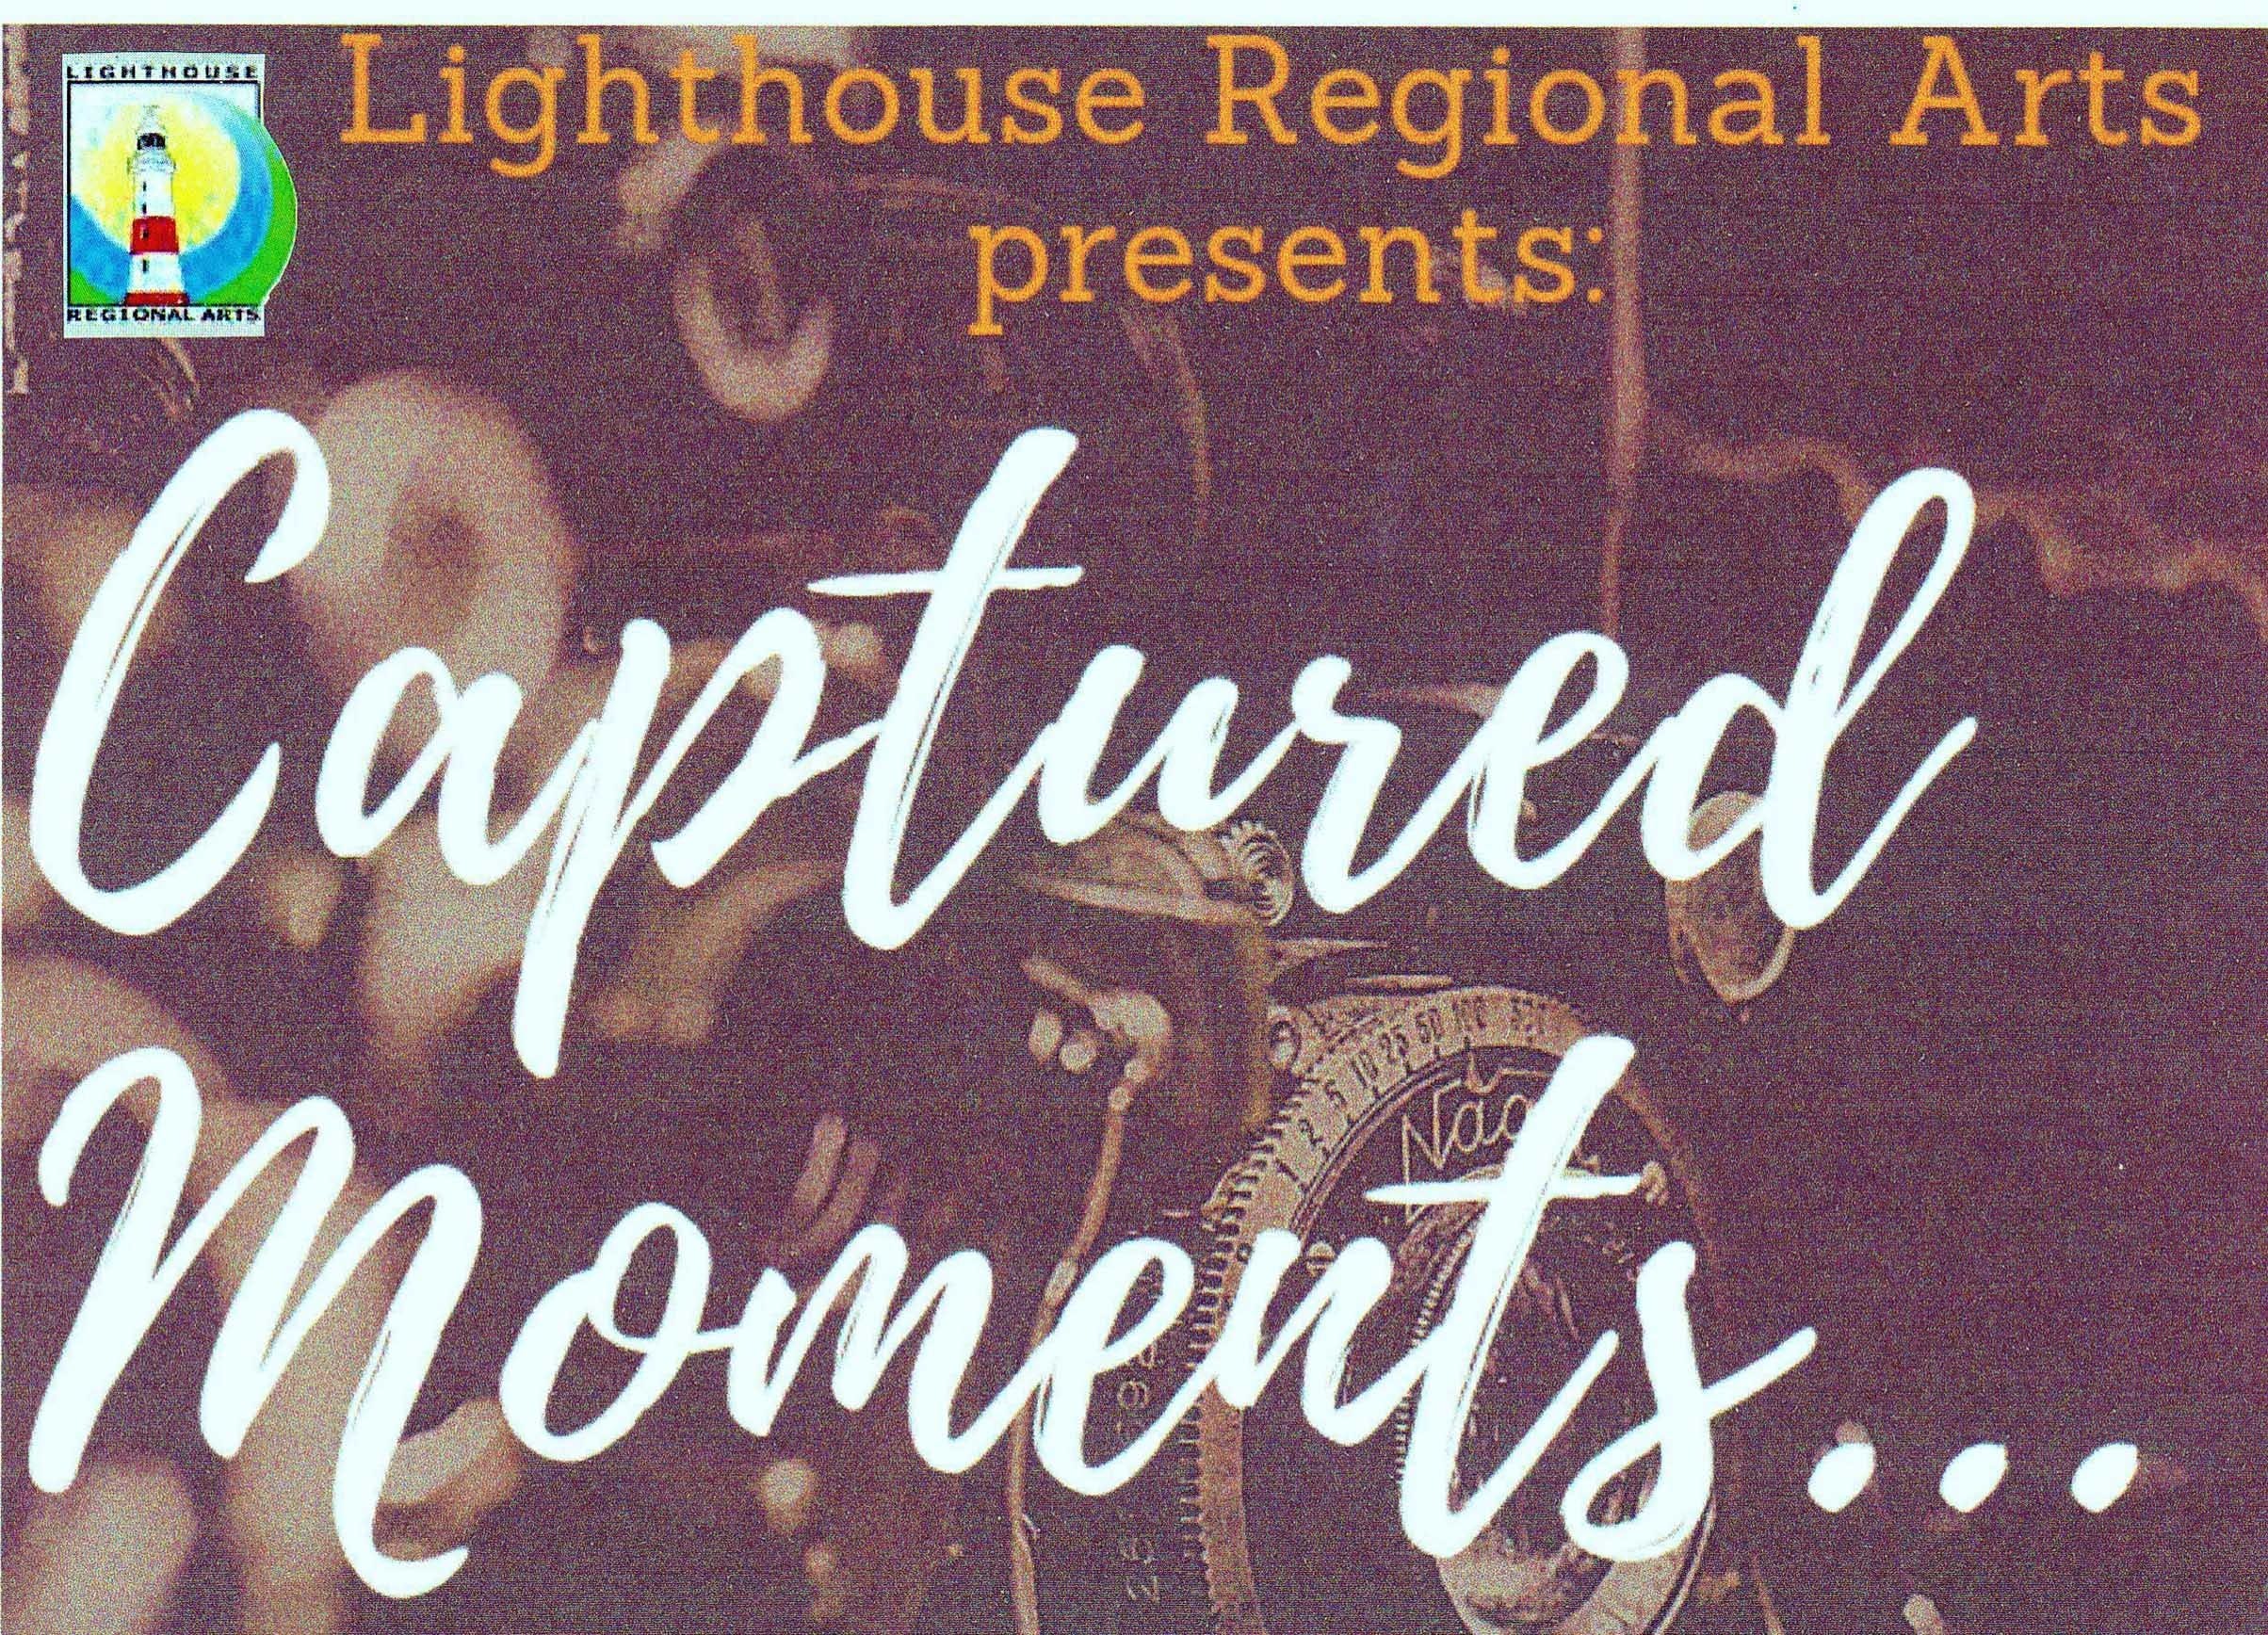 Watch House Exhibition  Captured Moments - Attractions